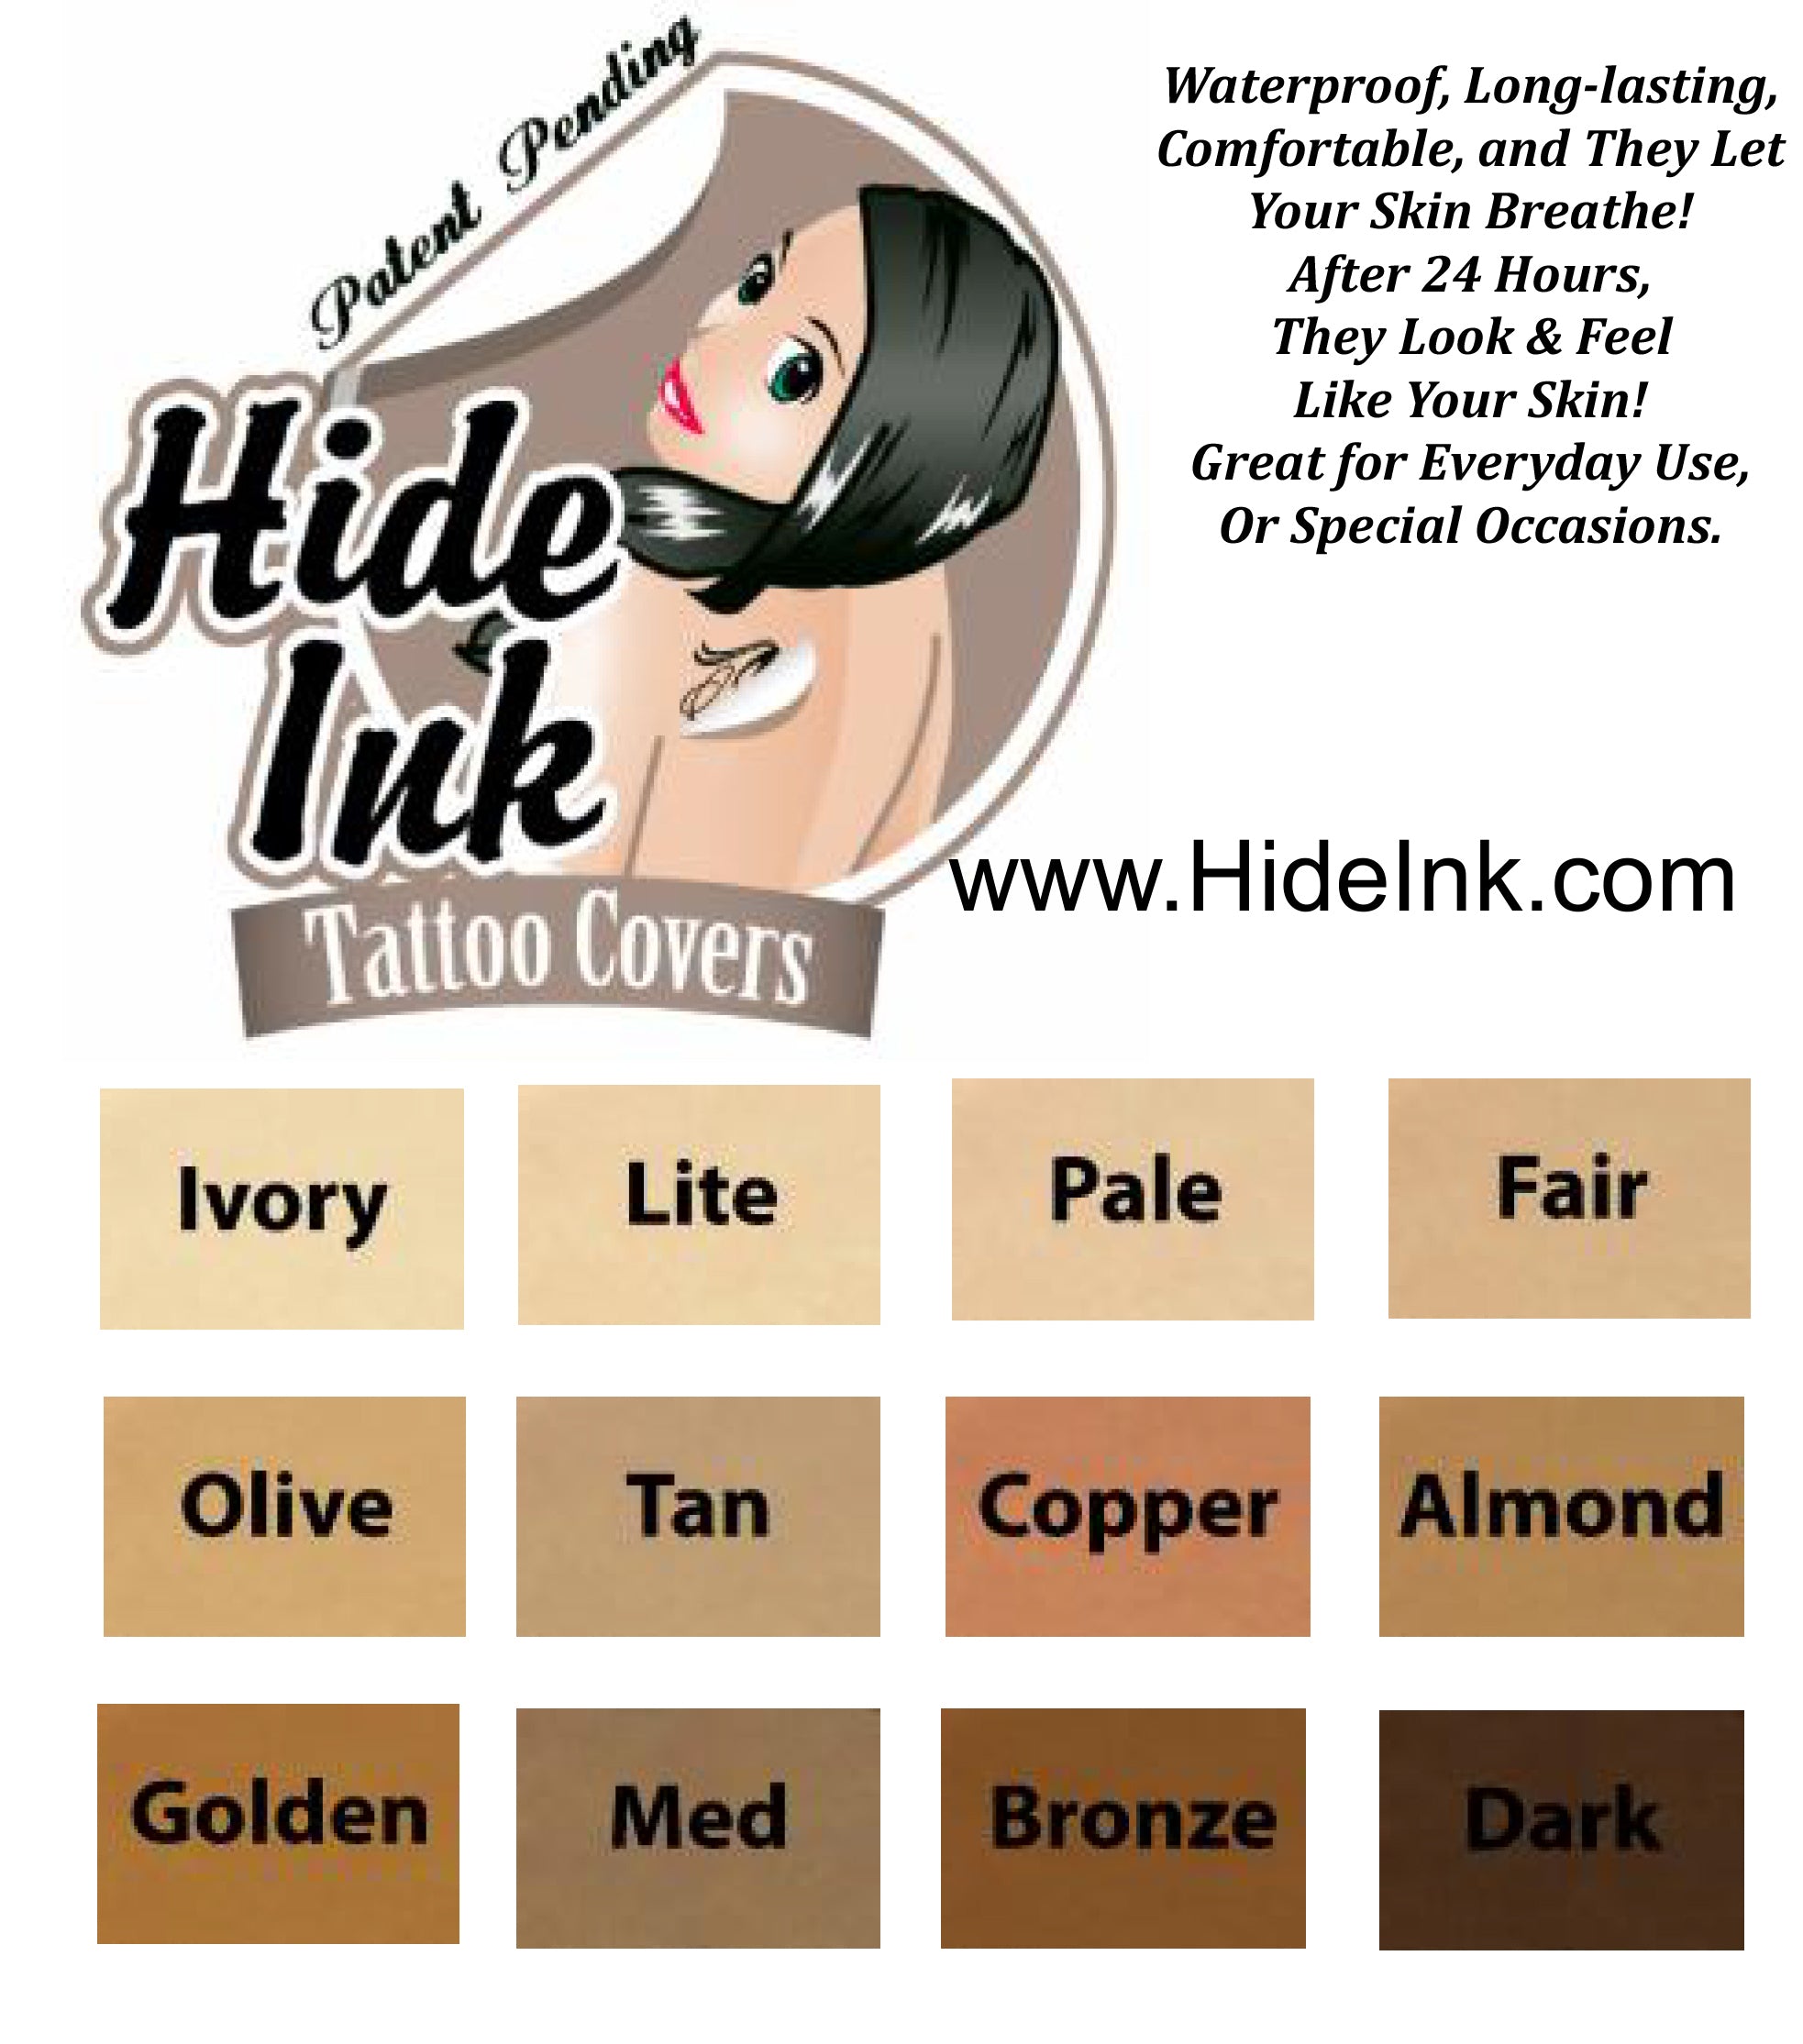 Best Skintone Tattoo Ink for Scars and Stretch Marks  Studio Conceal